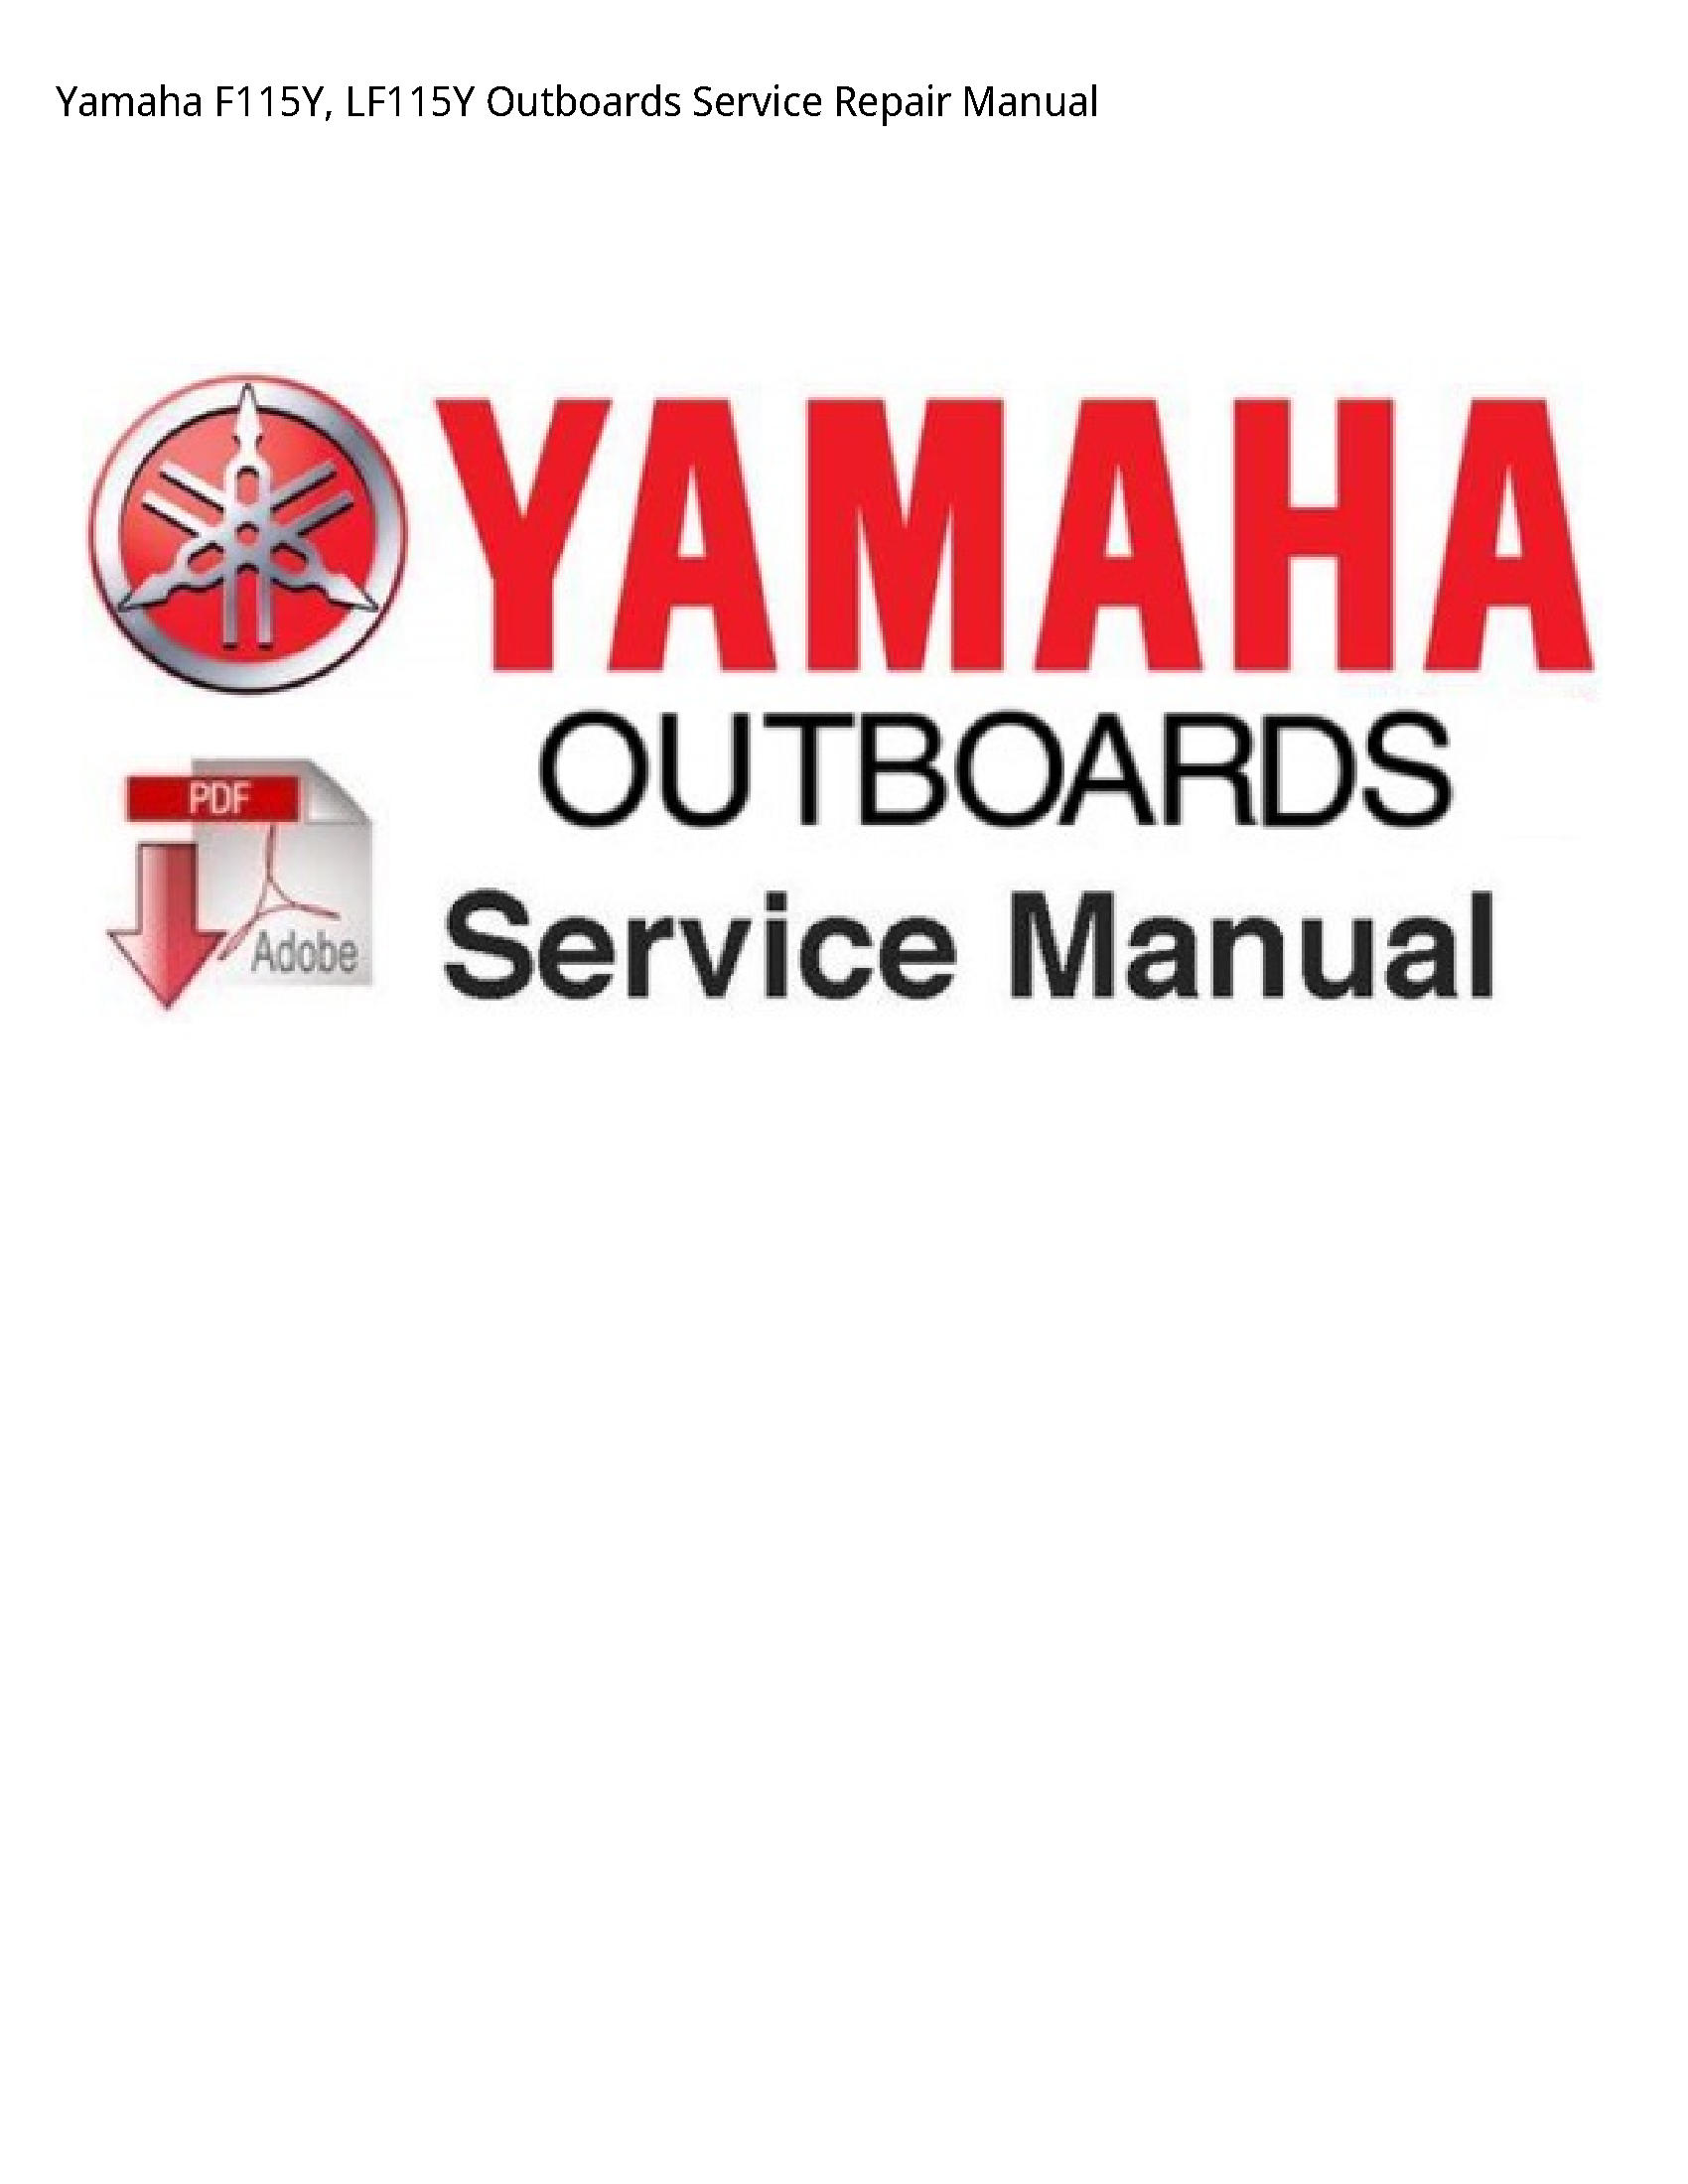 Yamaha F115Y Outboards manual